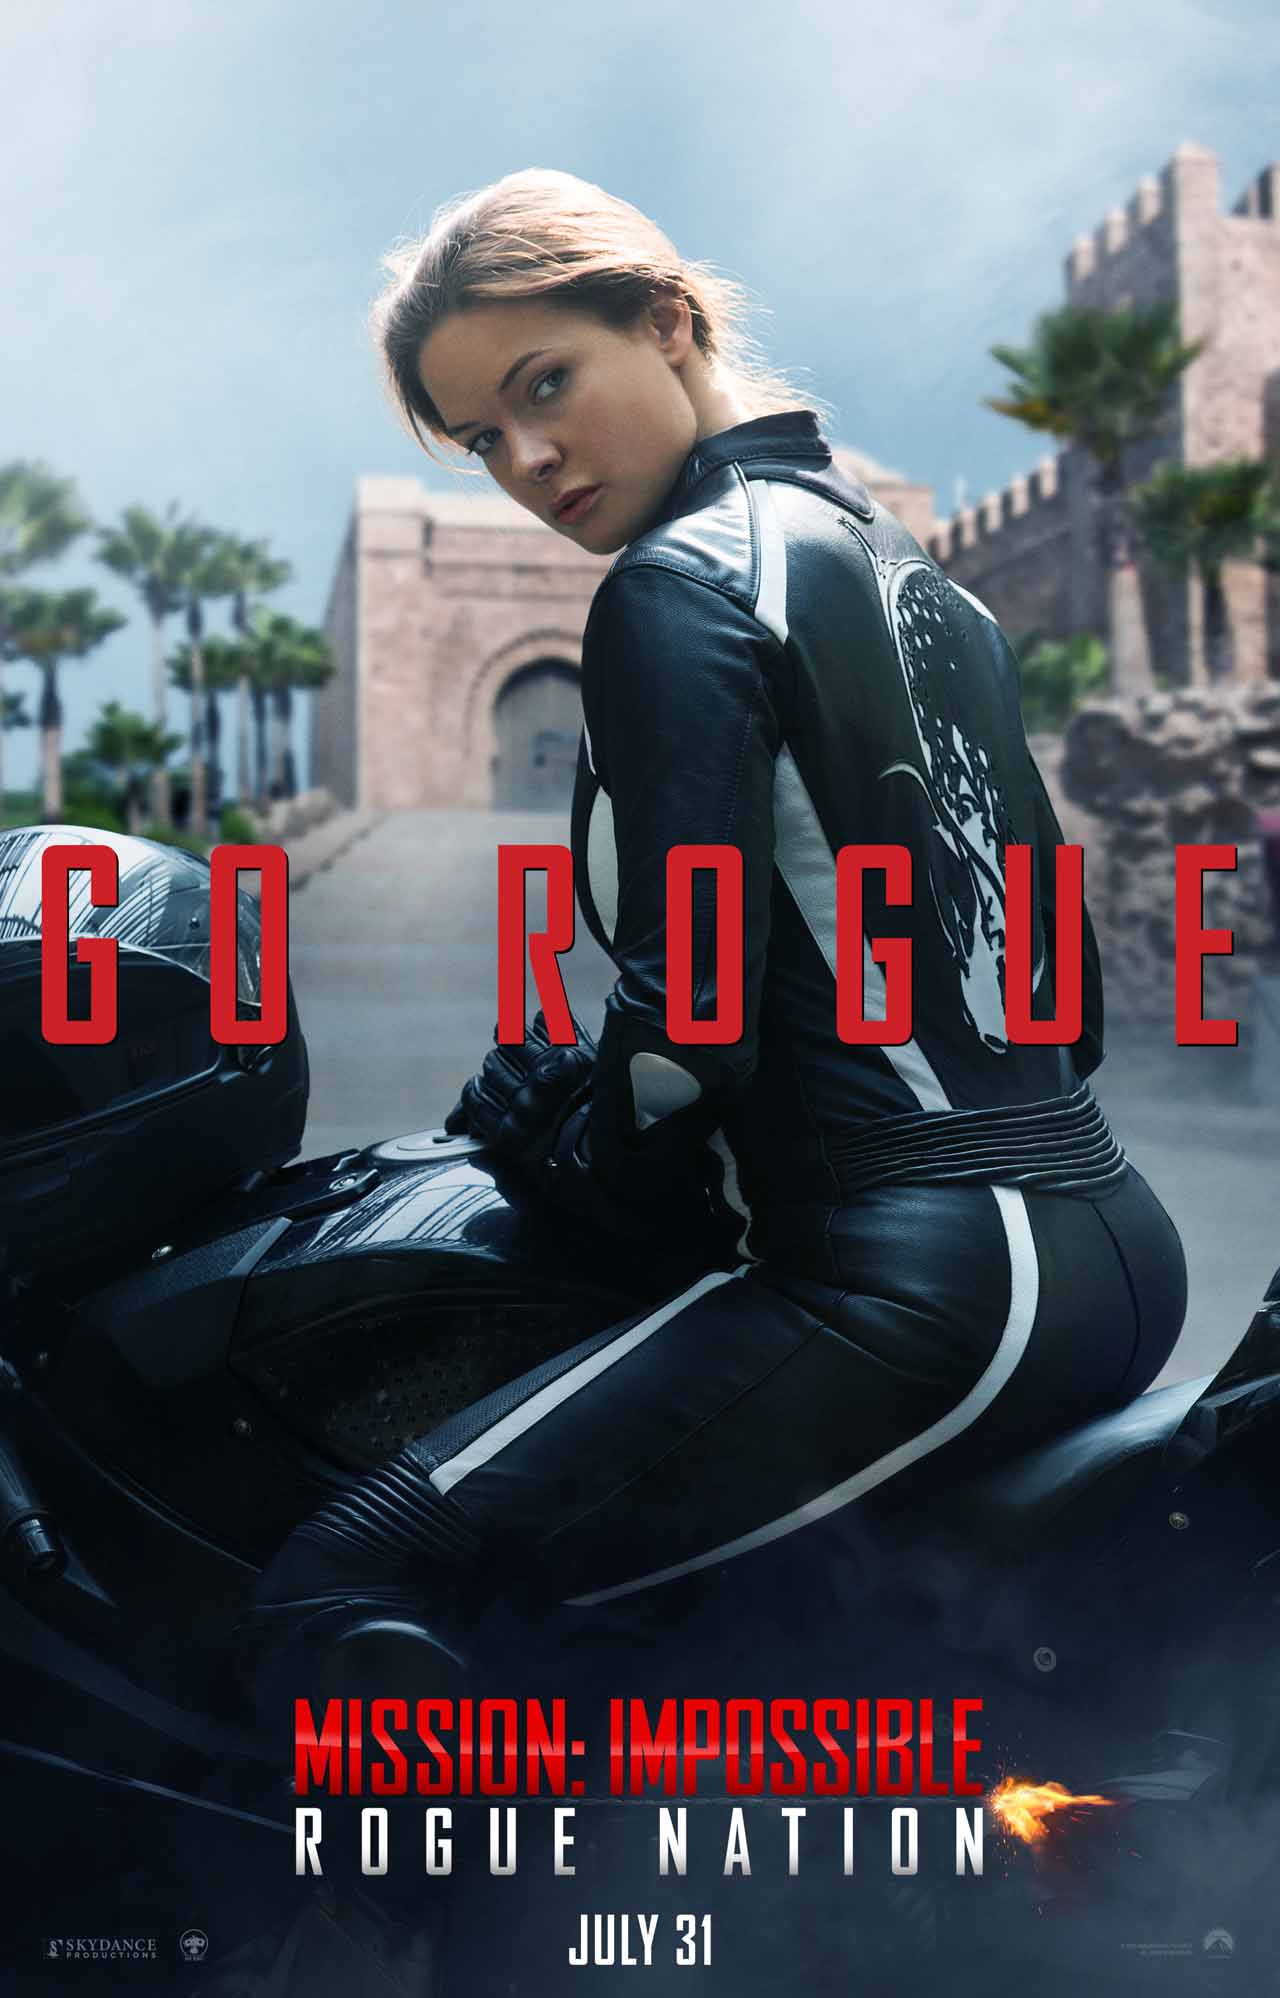 Mission: Impossible - Rogue Nation #2